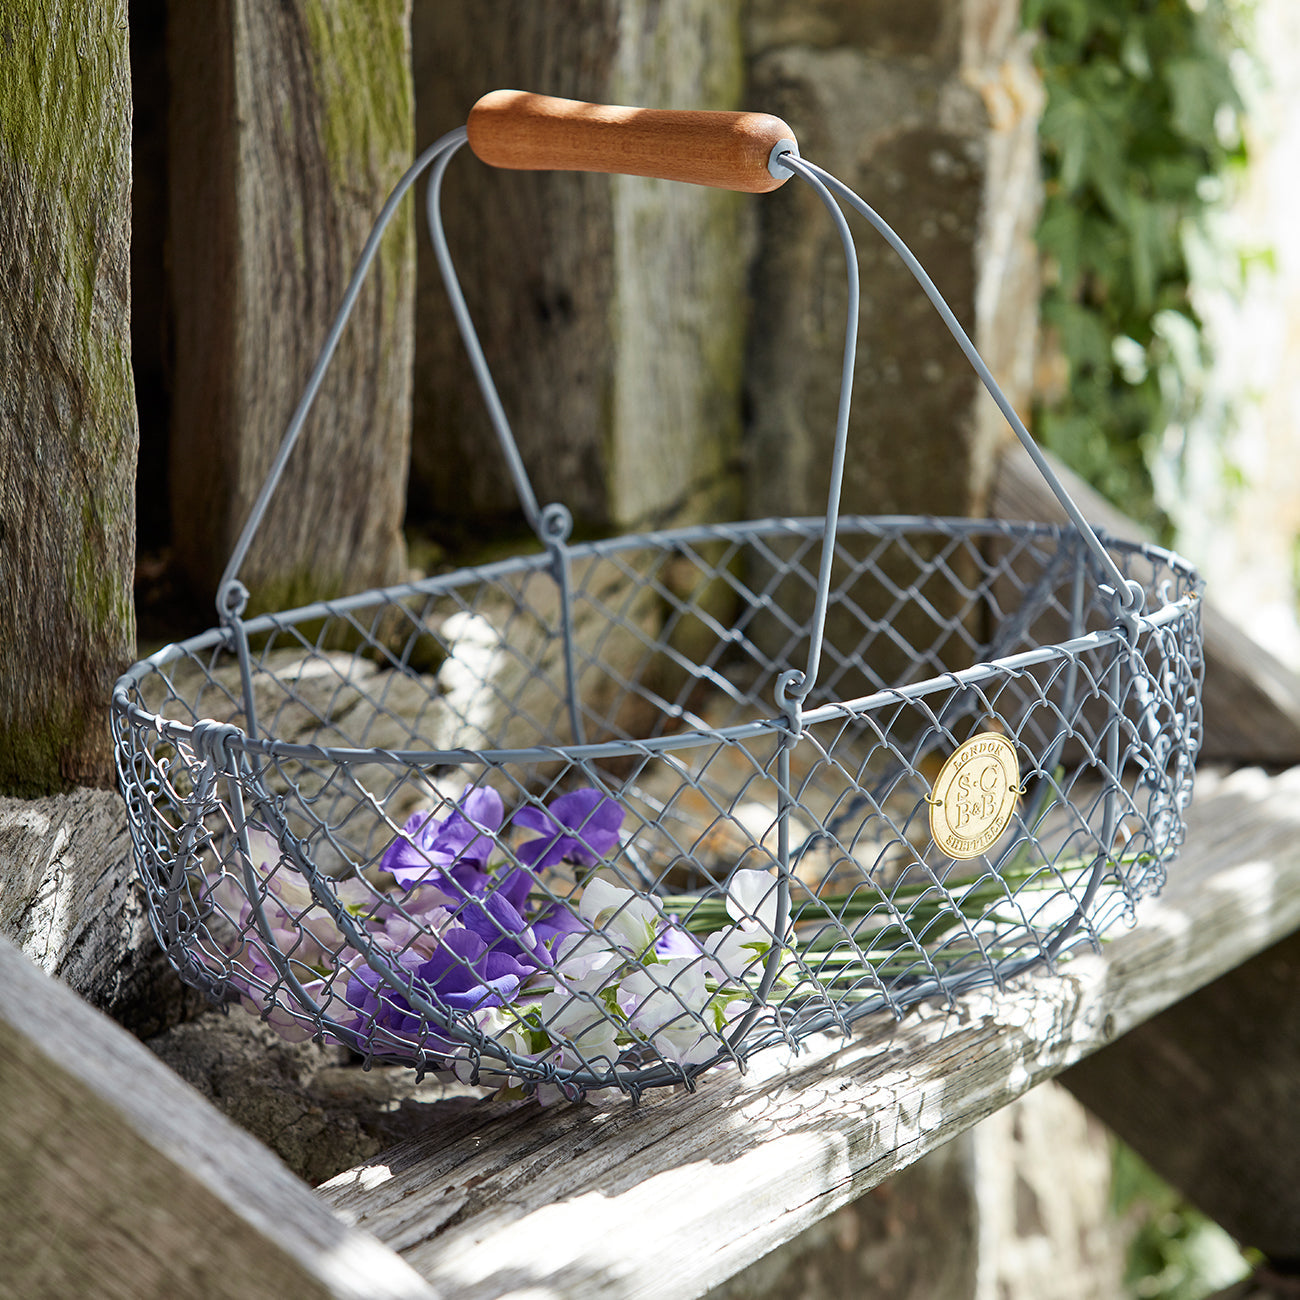 Collect flowers in this beautiful harvesting basket.